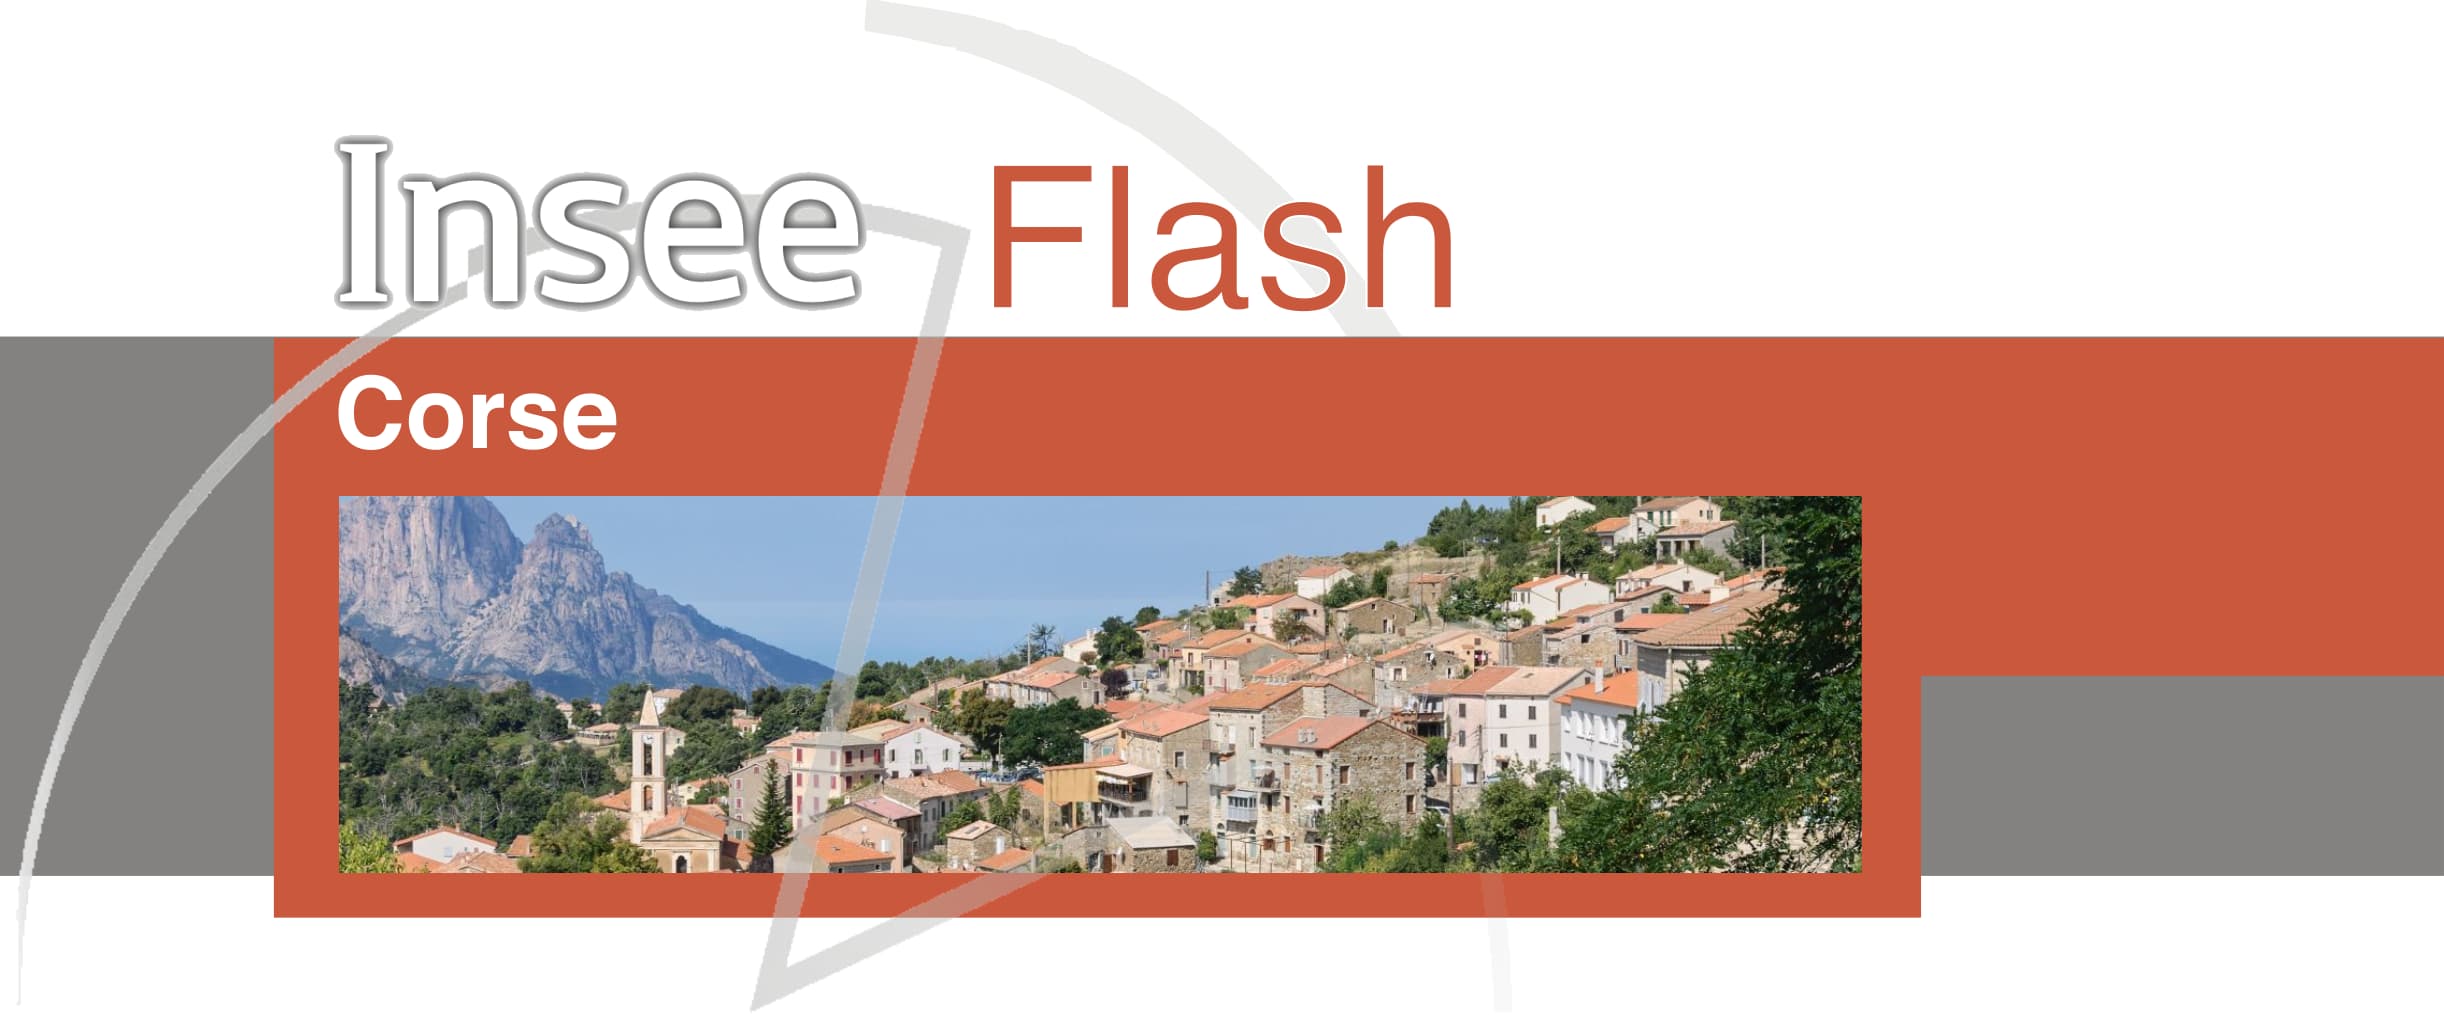 Insee Flash Corse